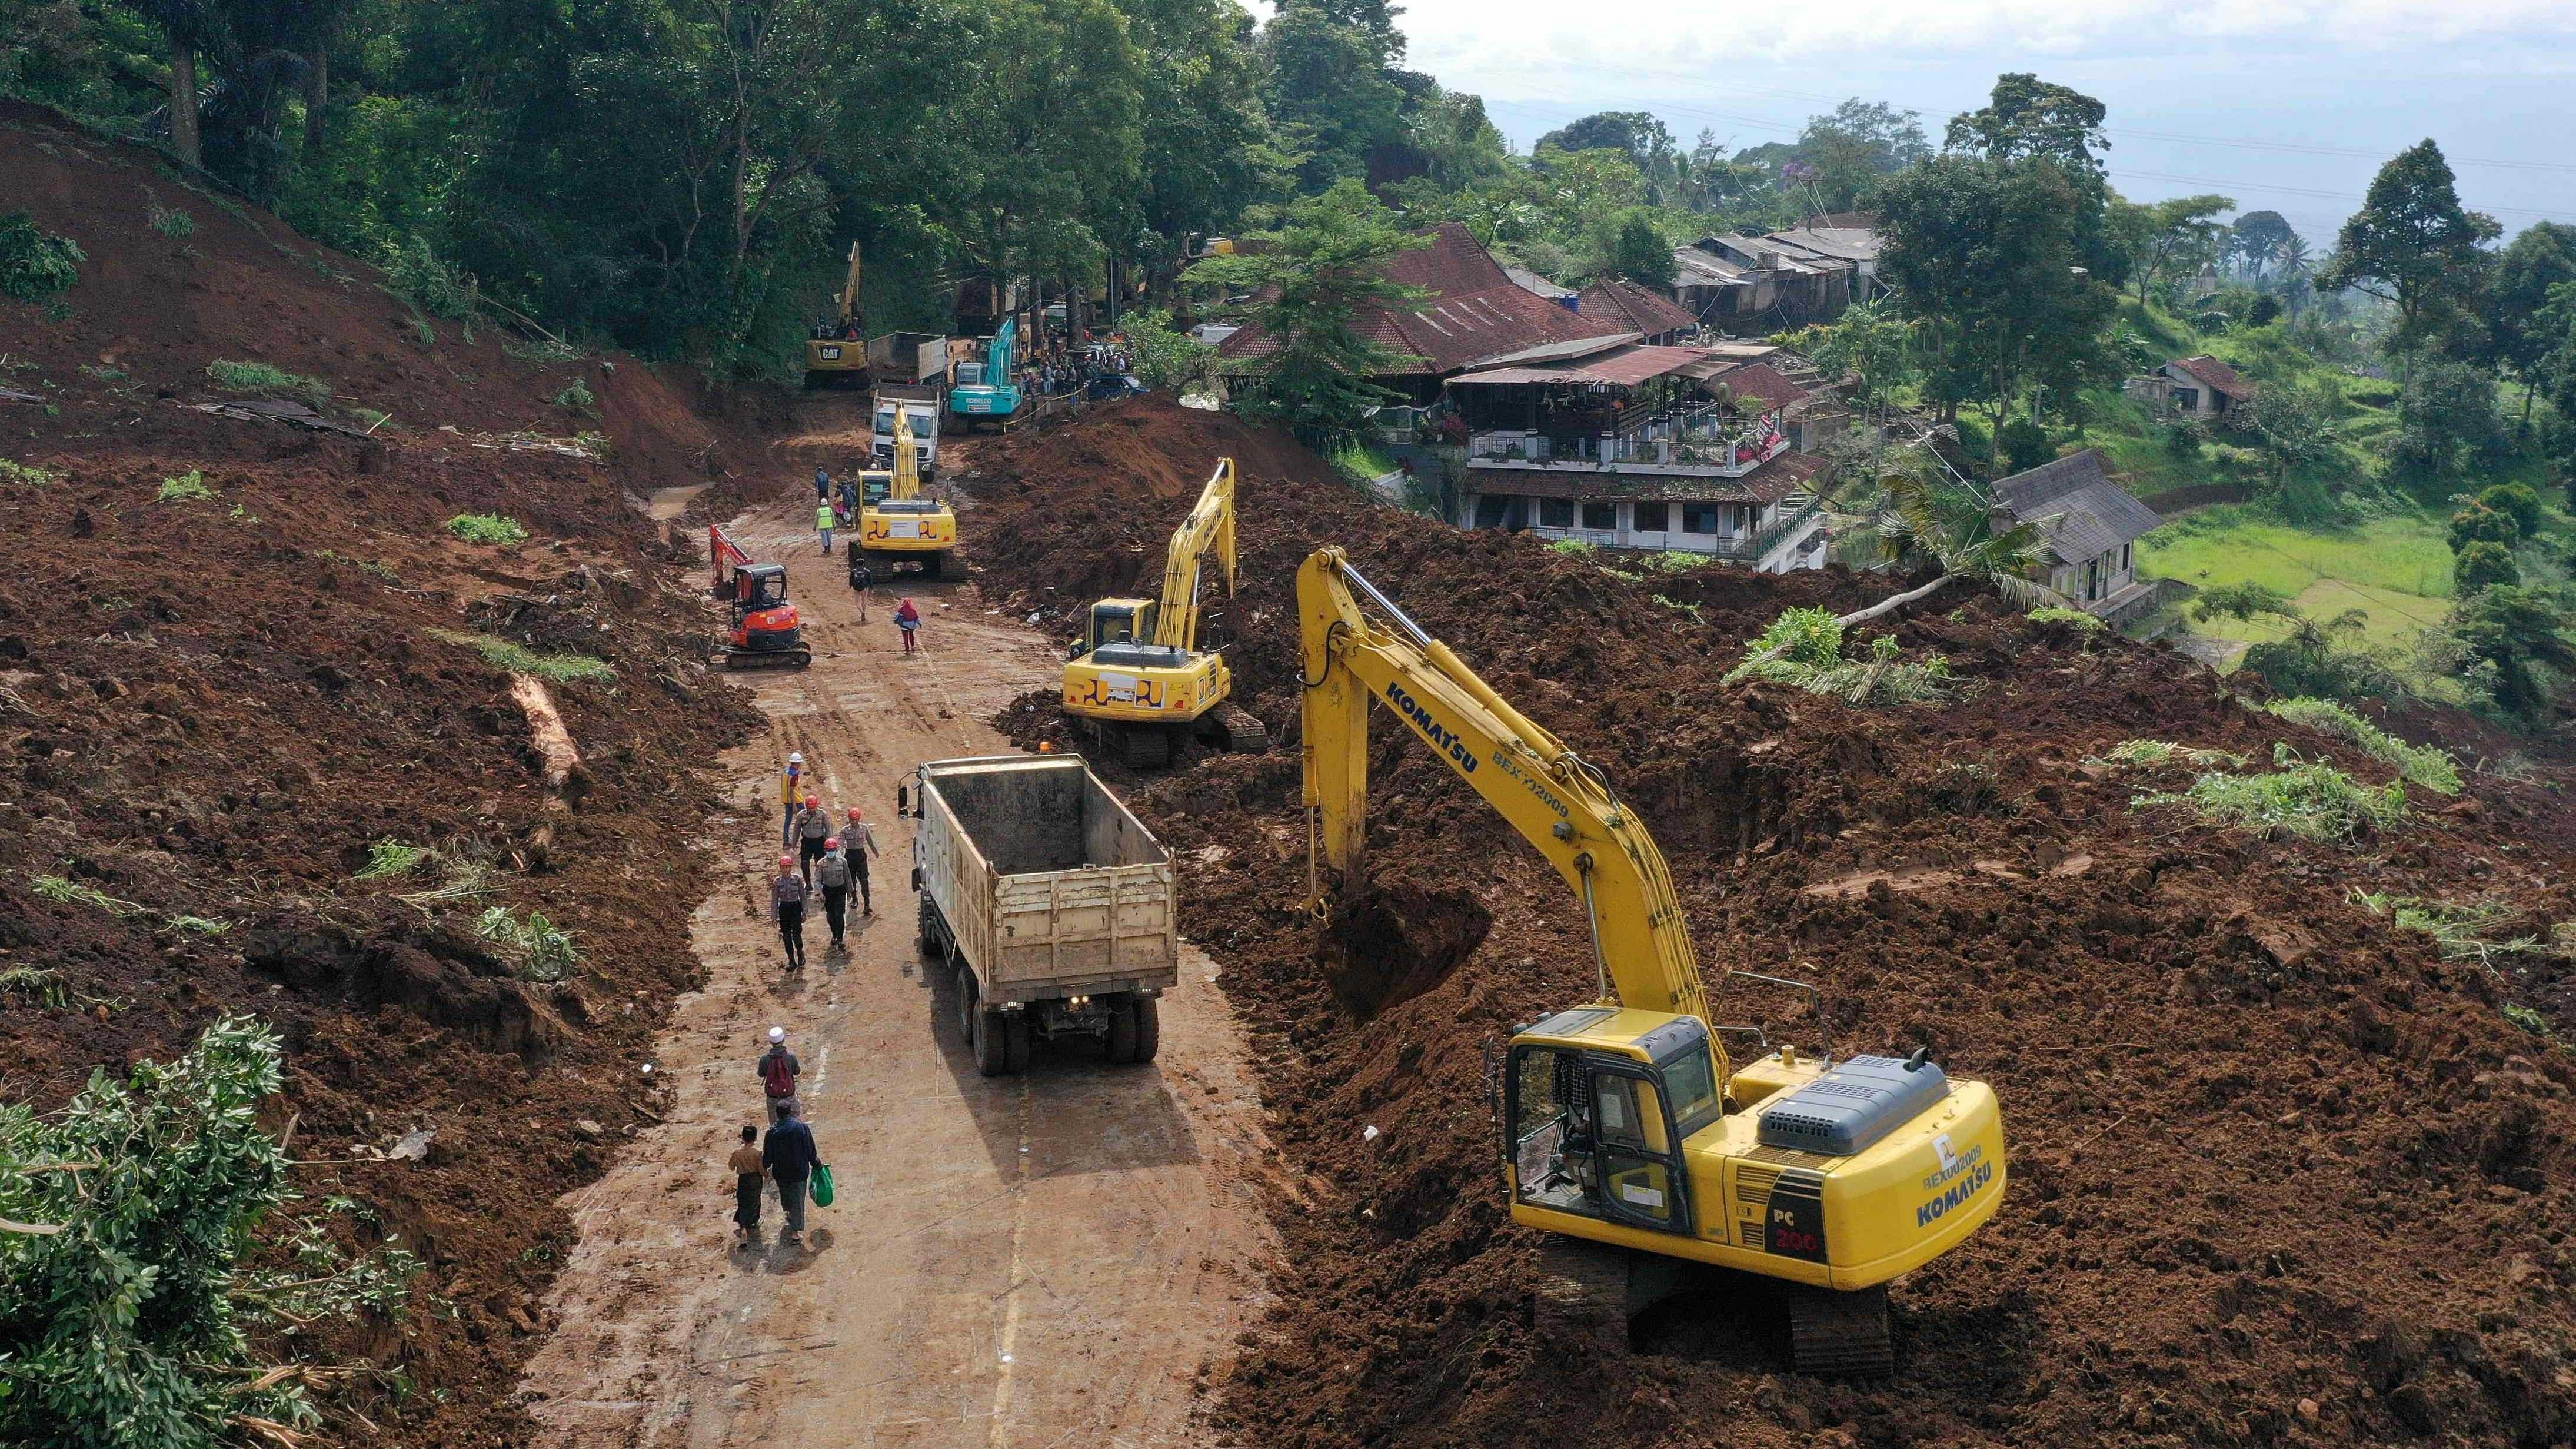 Workers using heavy equipments to remove soil following landslide triggered by a 5.6-magnitude earthquake near Cianjur on November 22, 2022. Credit: AFP Photo